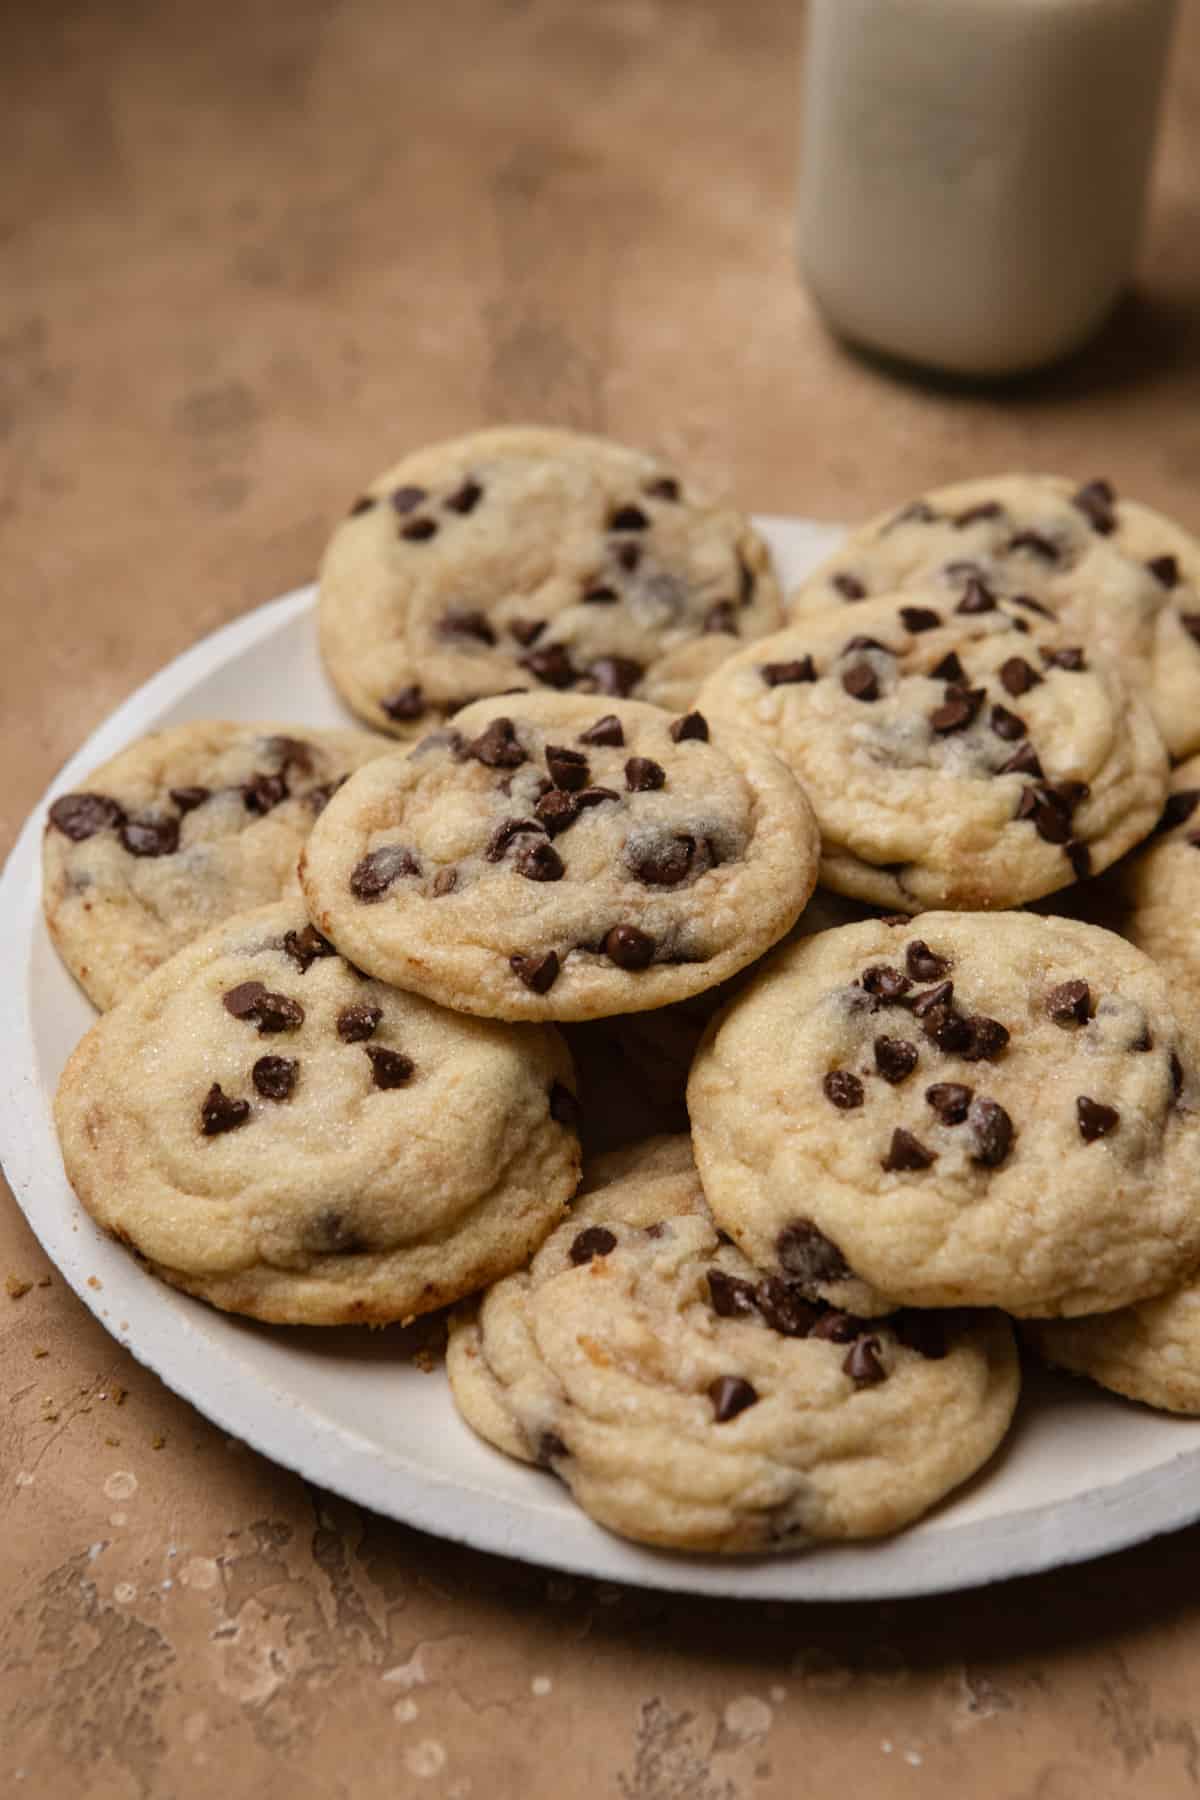 Chocolate chip cookies on a white plate with a bottle of milk in the background.